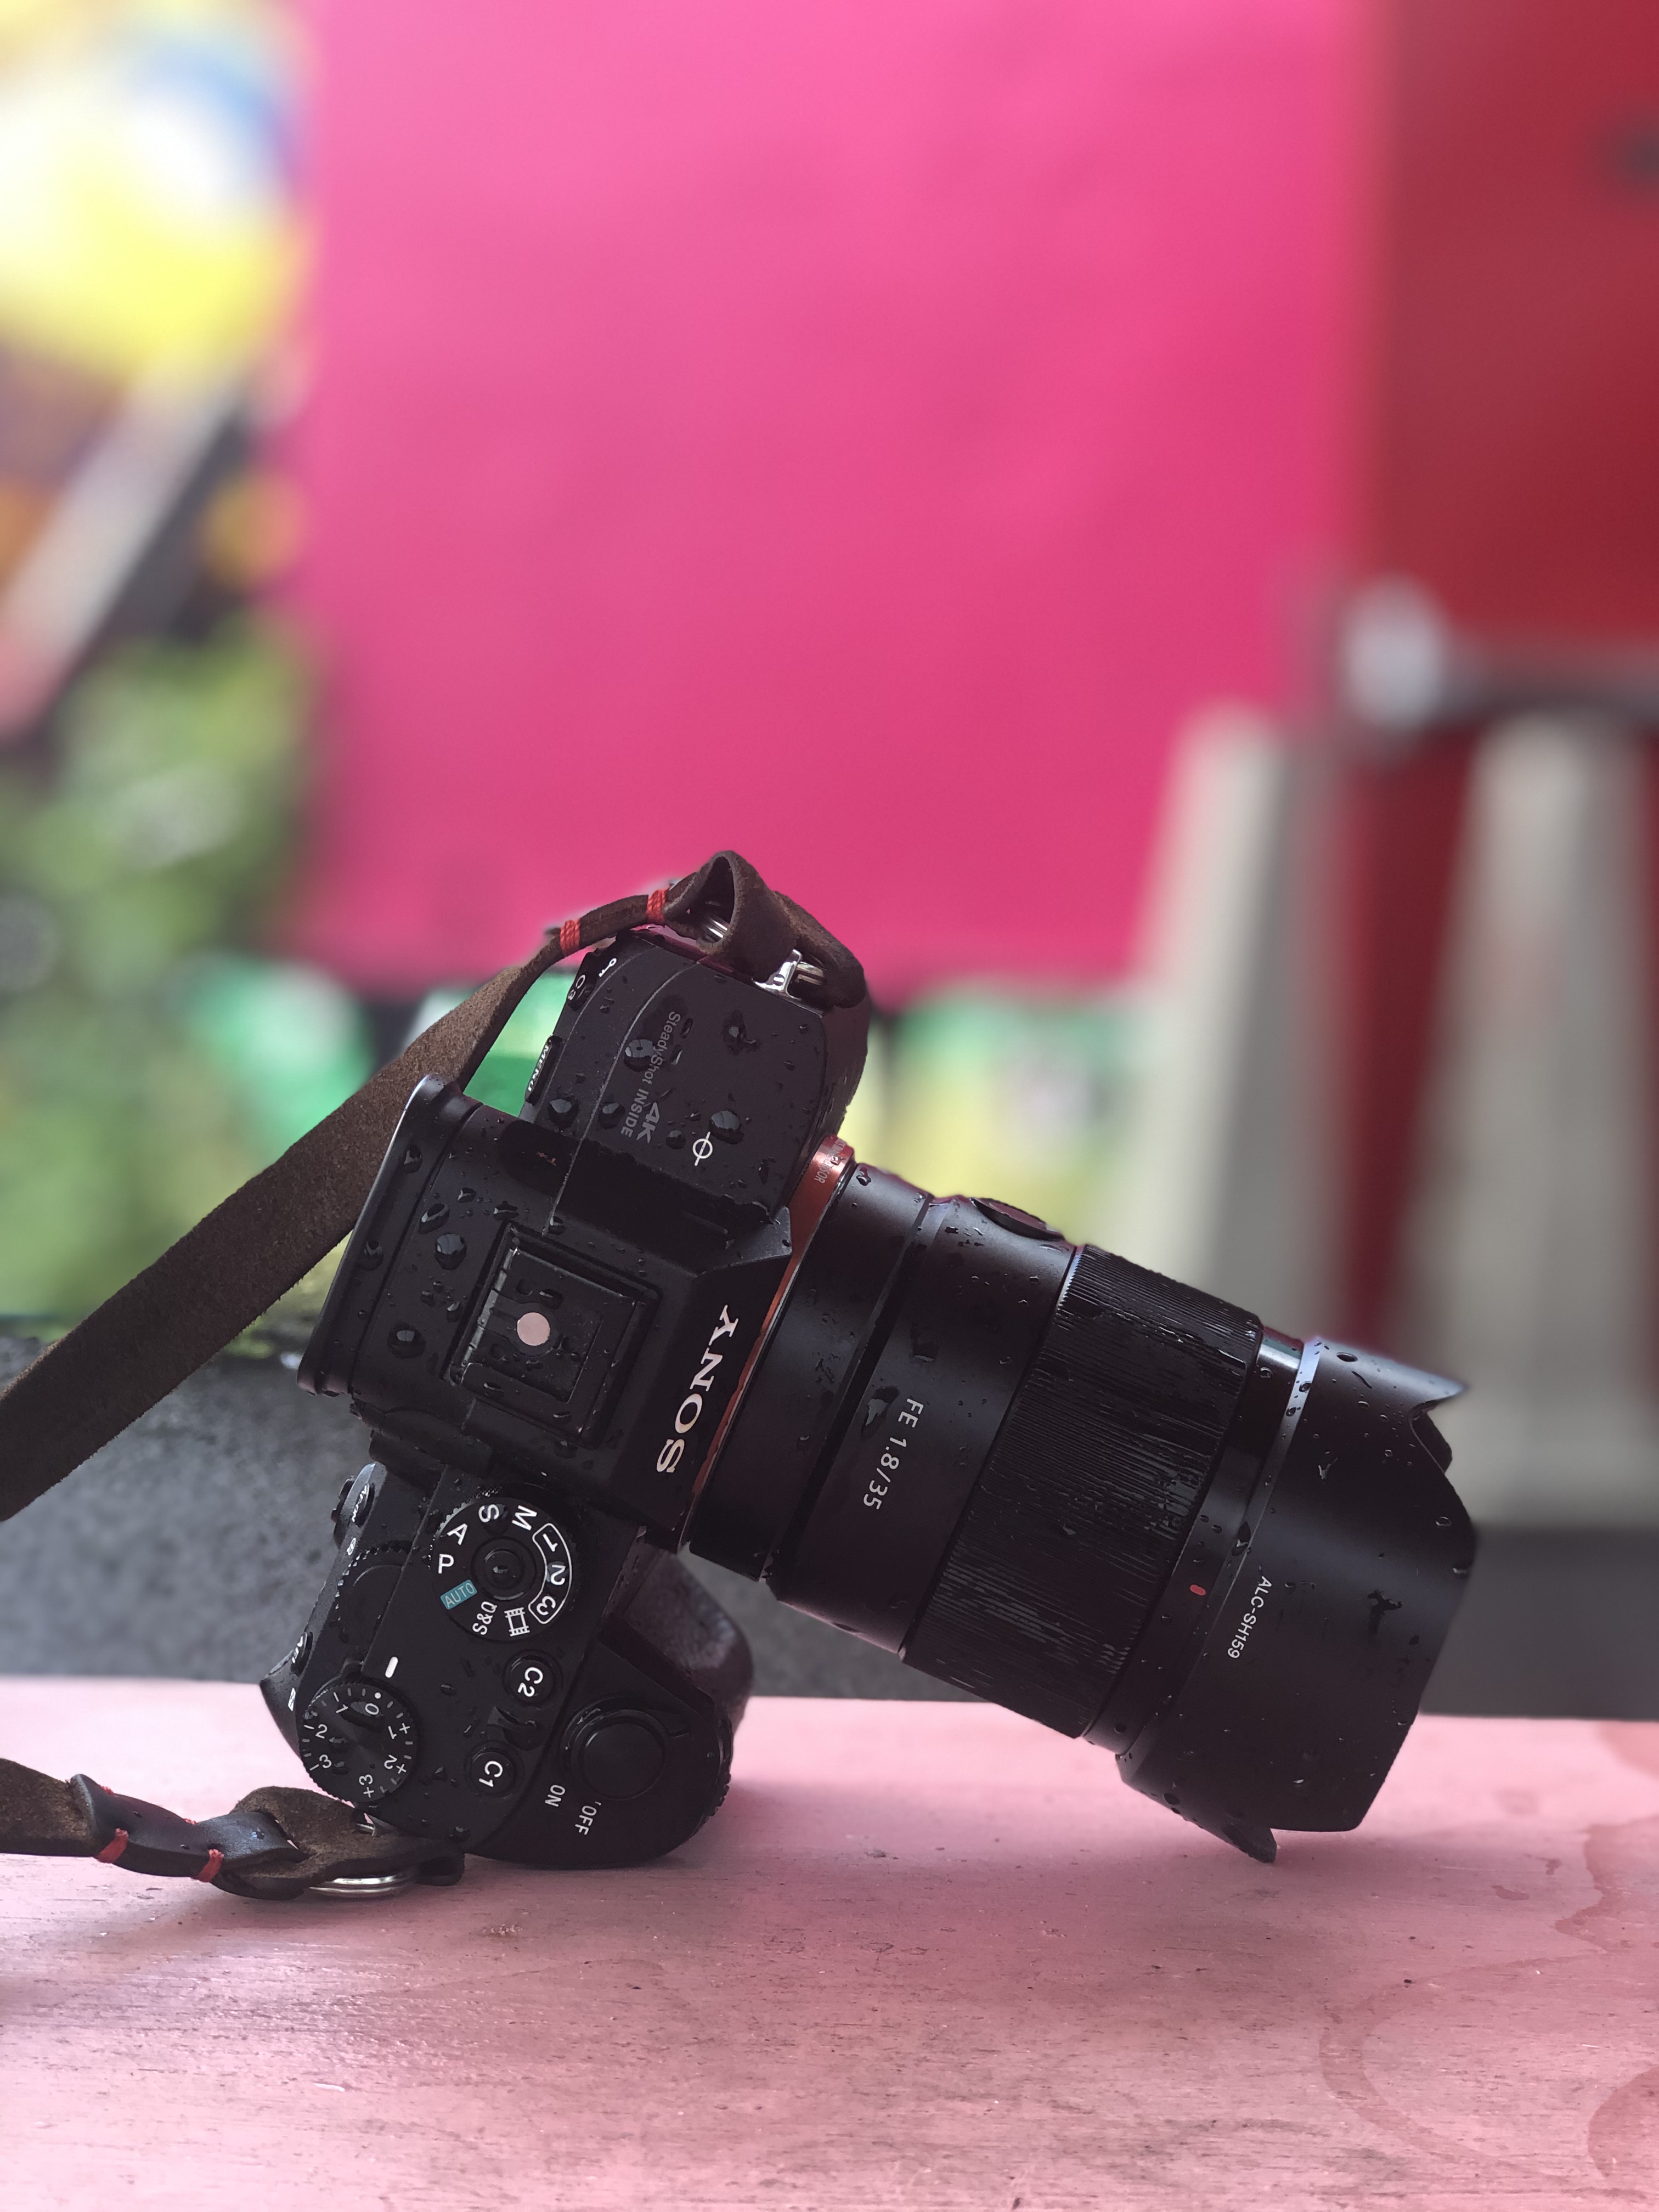 Sony FE 35mm f/1.8: Every Sony Photographer Should Own This Lens